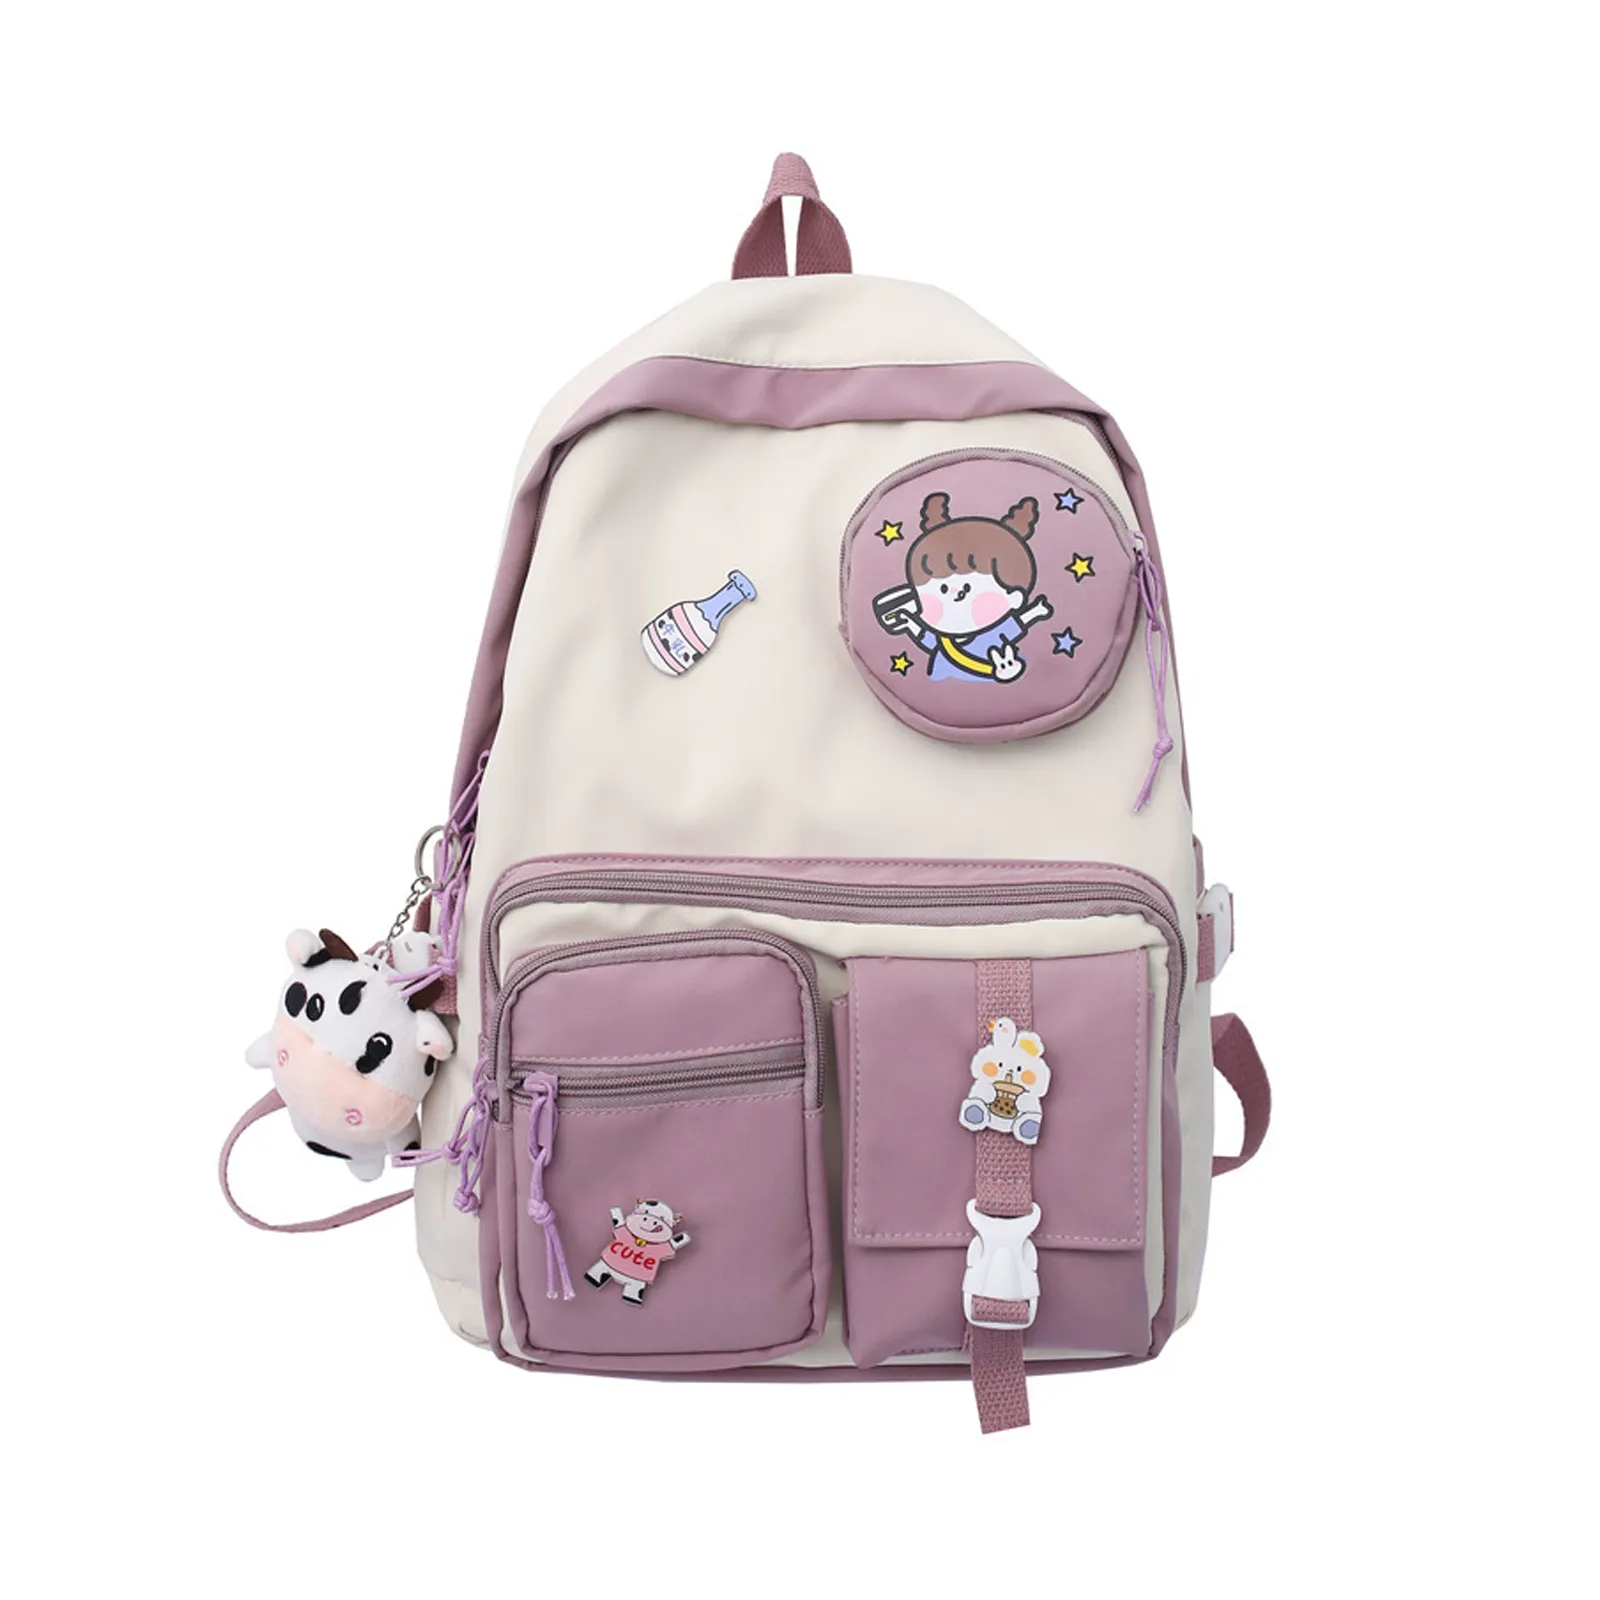 2020 New Badge Girl Doll Backpack Kawaii Book Ladies Fashion Bags Trendy Accessories Kawaii Backpack with Pin